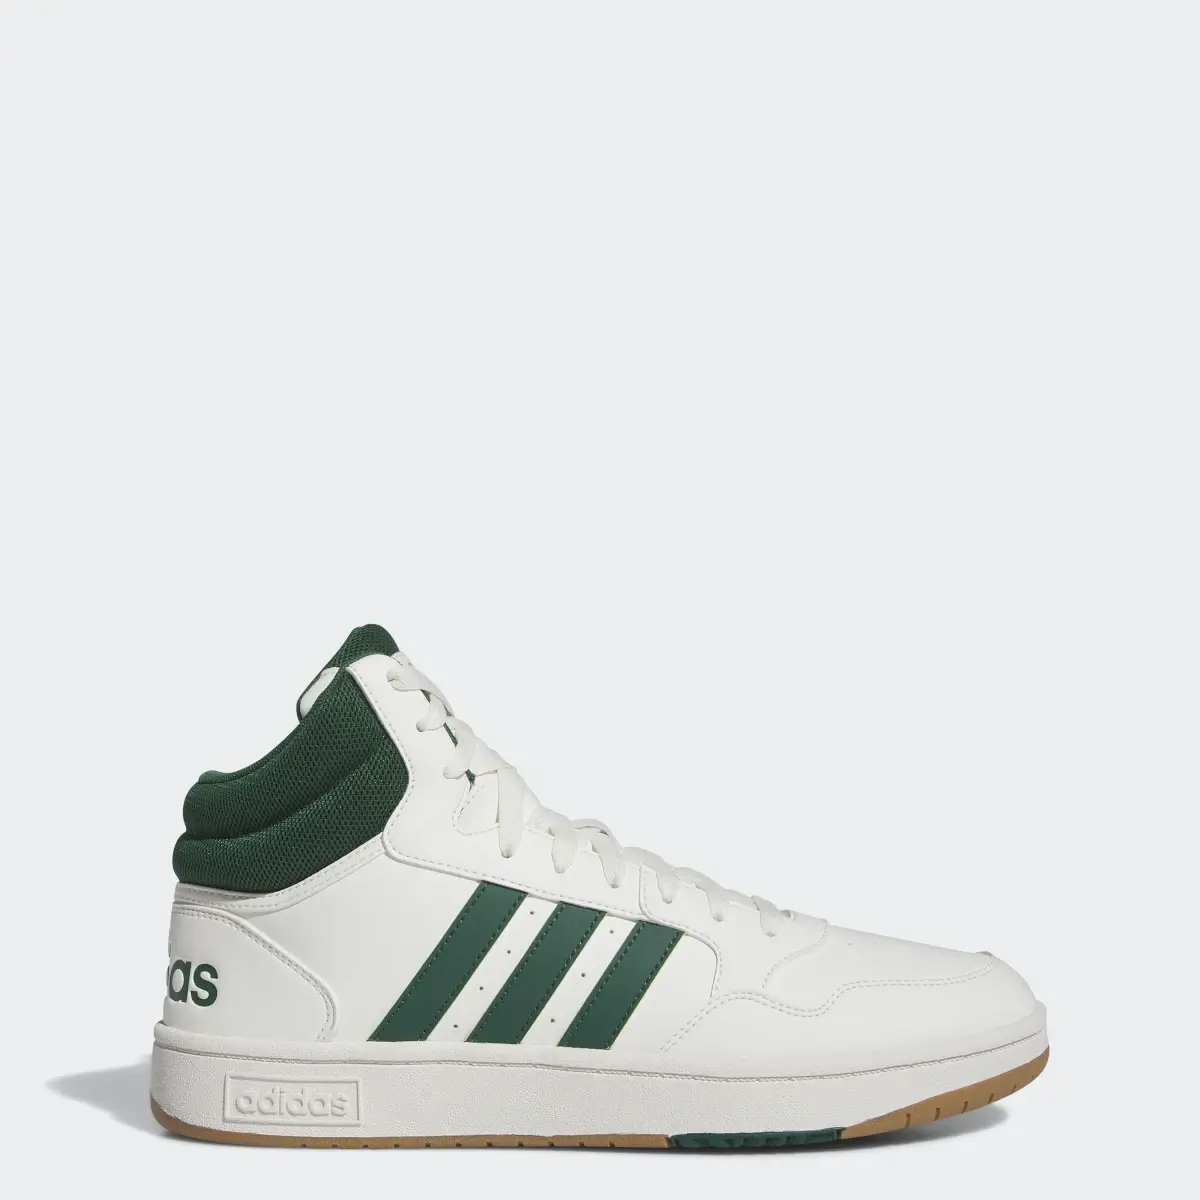 Adidas Hoops 3.0 Mid Lifestyle Basketball Classic Vintage Shoes. 1